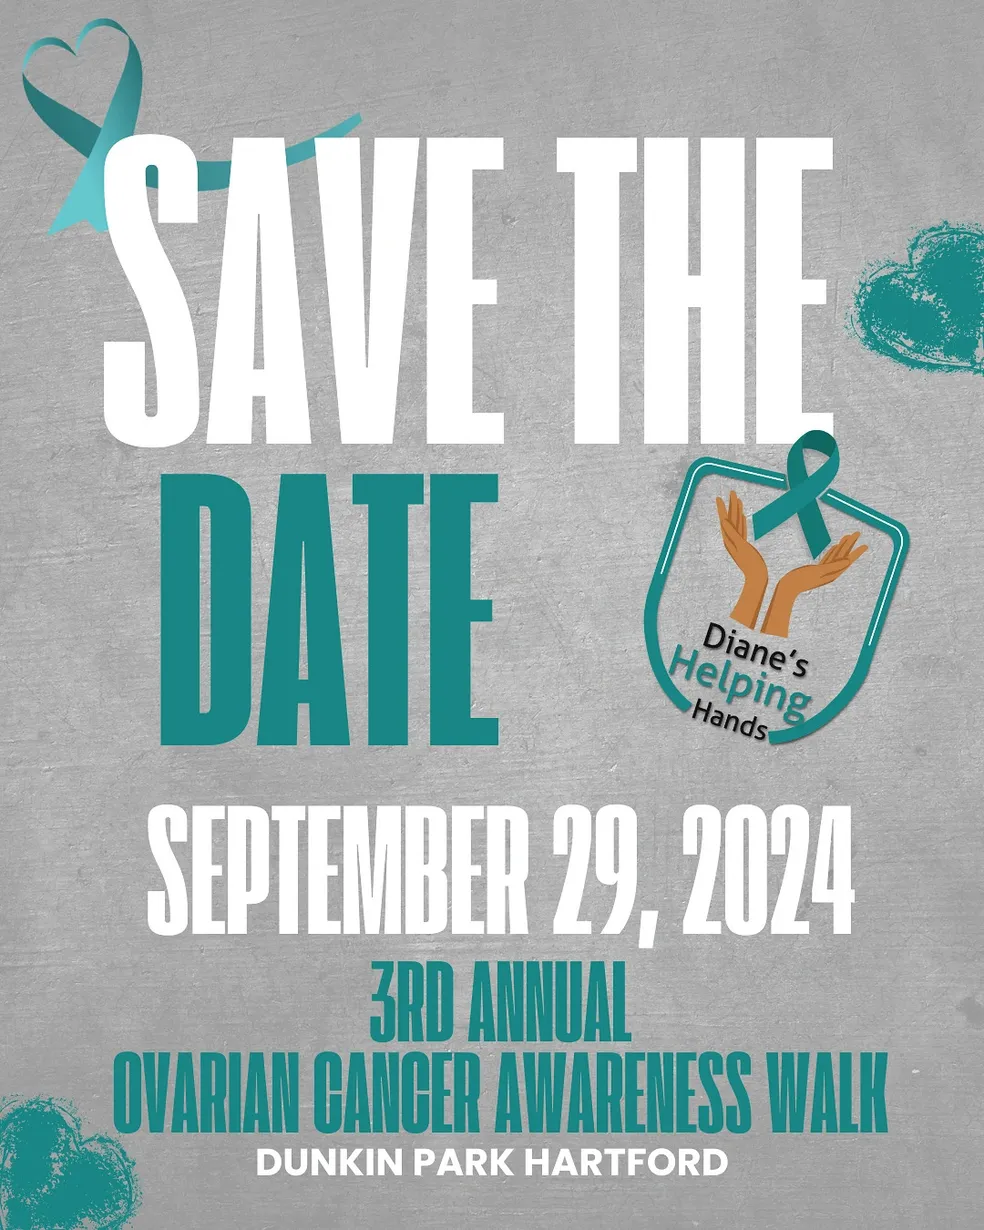 flyer with information about the ovarian cancer walk on September 29th, 2024